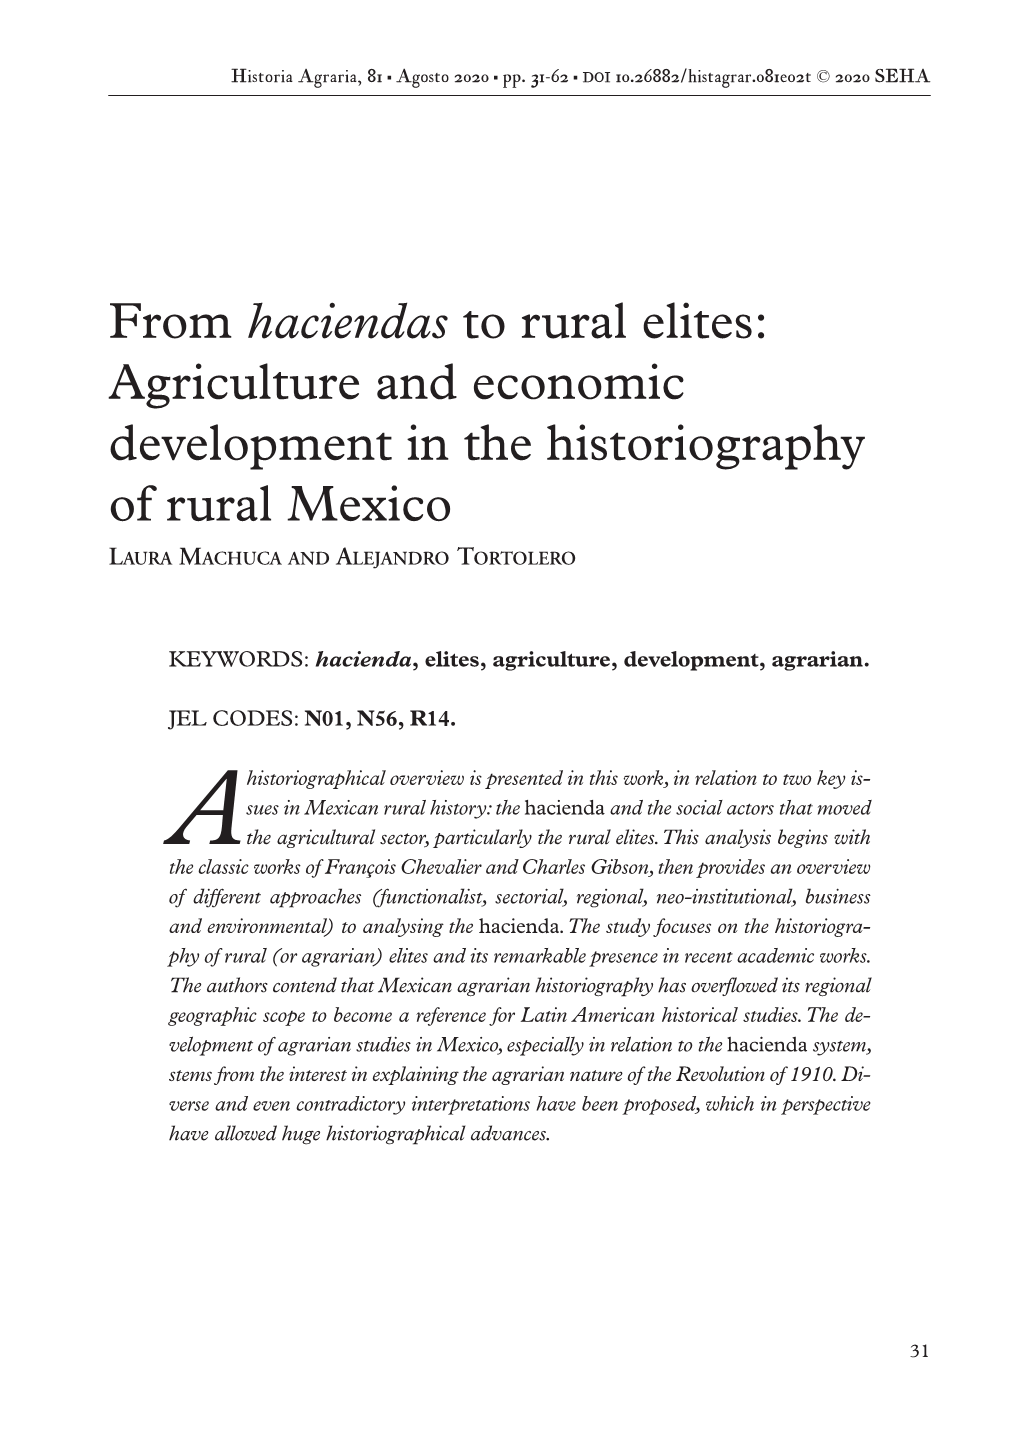 From Haciendas to Rural Elites: Agriculture and Economic Development in the Historiography of Rural Mexico LAURA MACHUCA and ALEJANDRO TORTOLERO